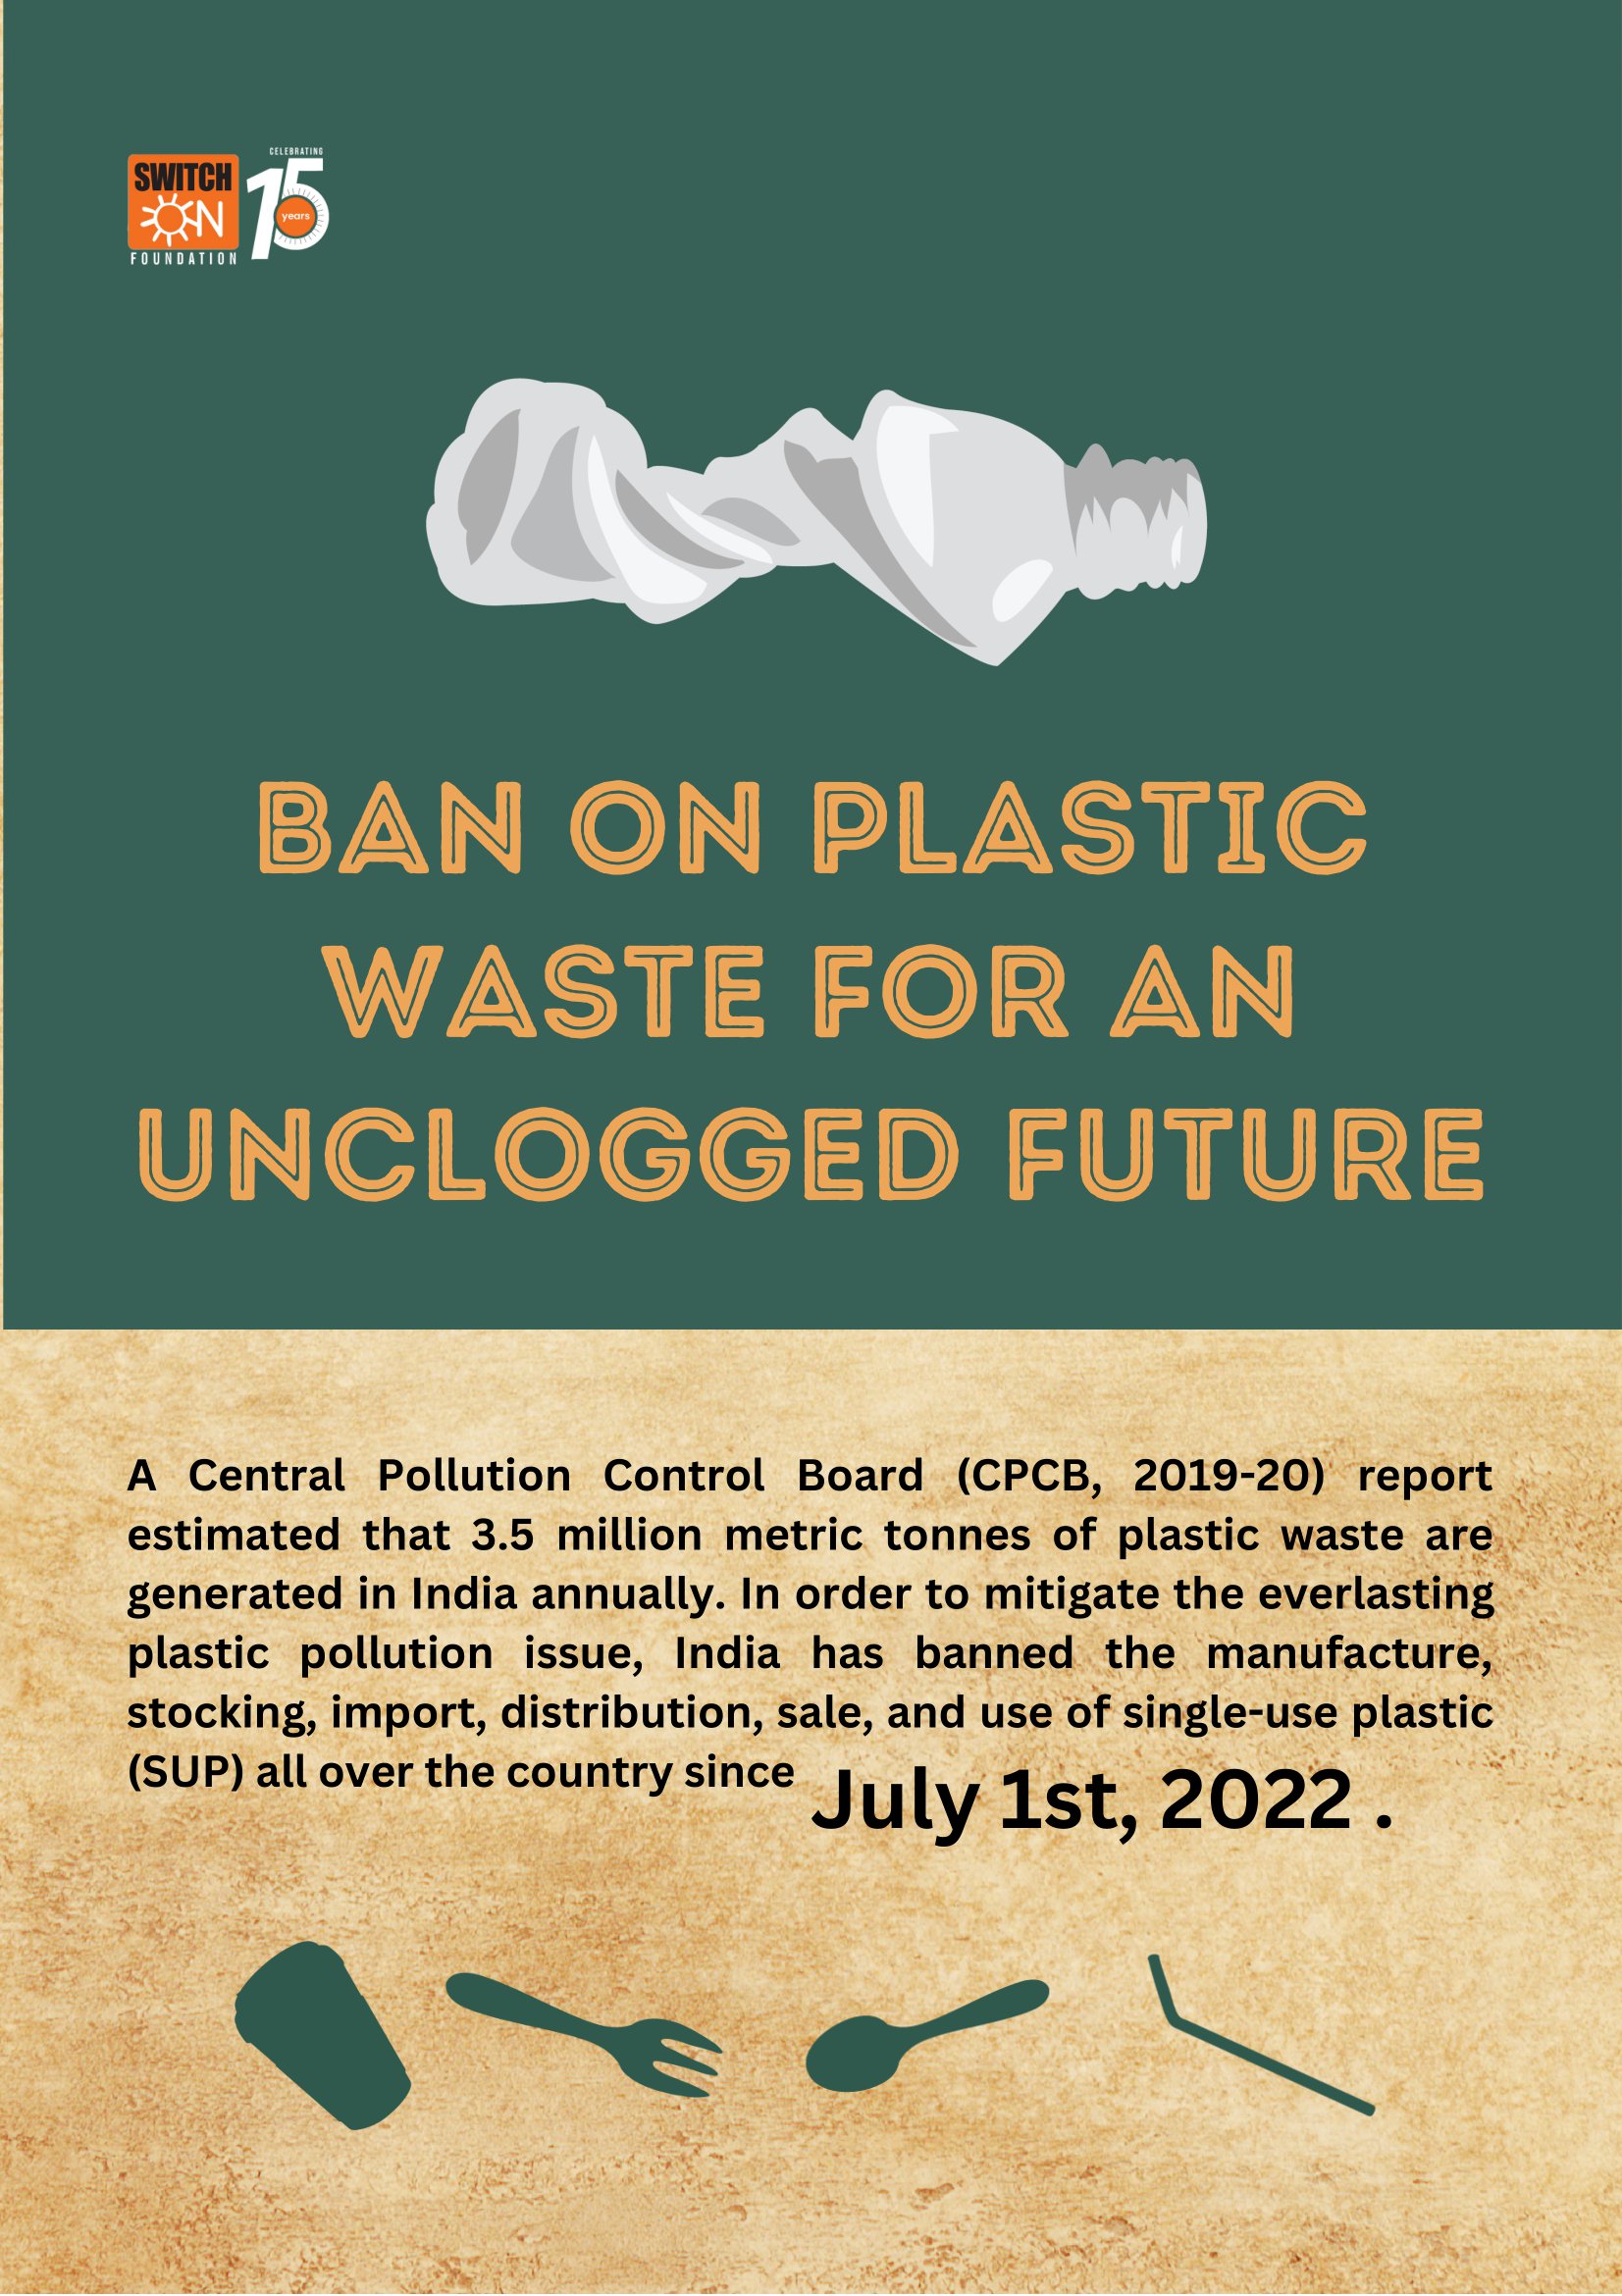 Ban on Plastic Waste for an Unclogged Future